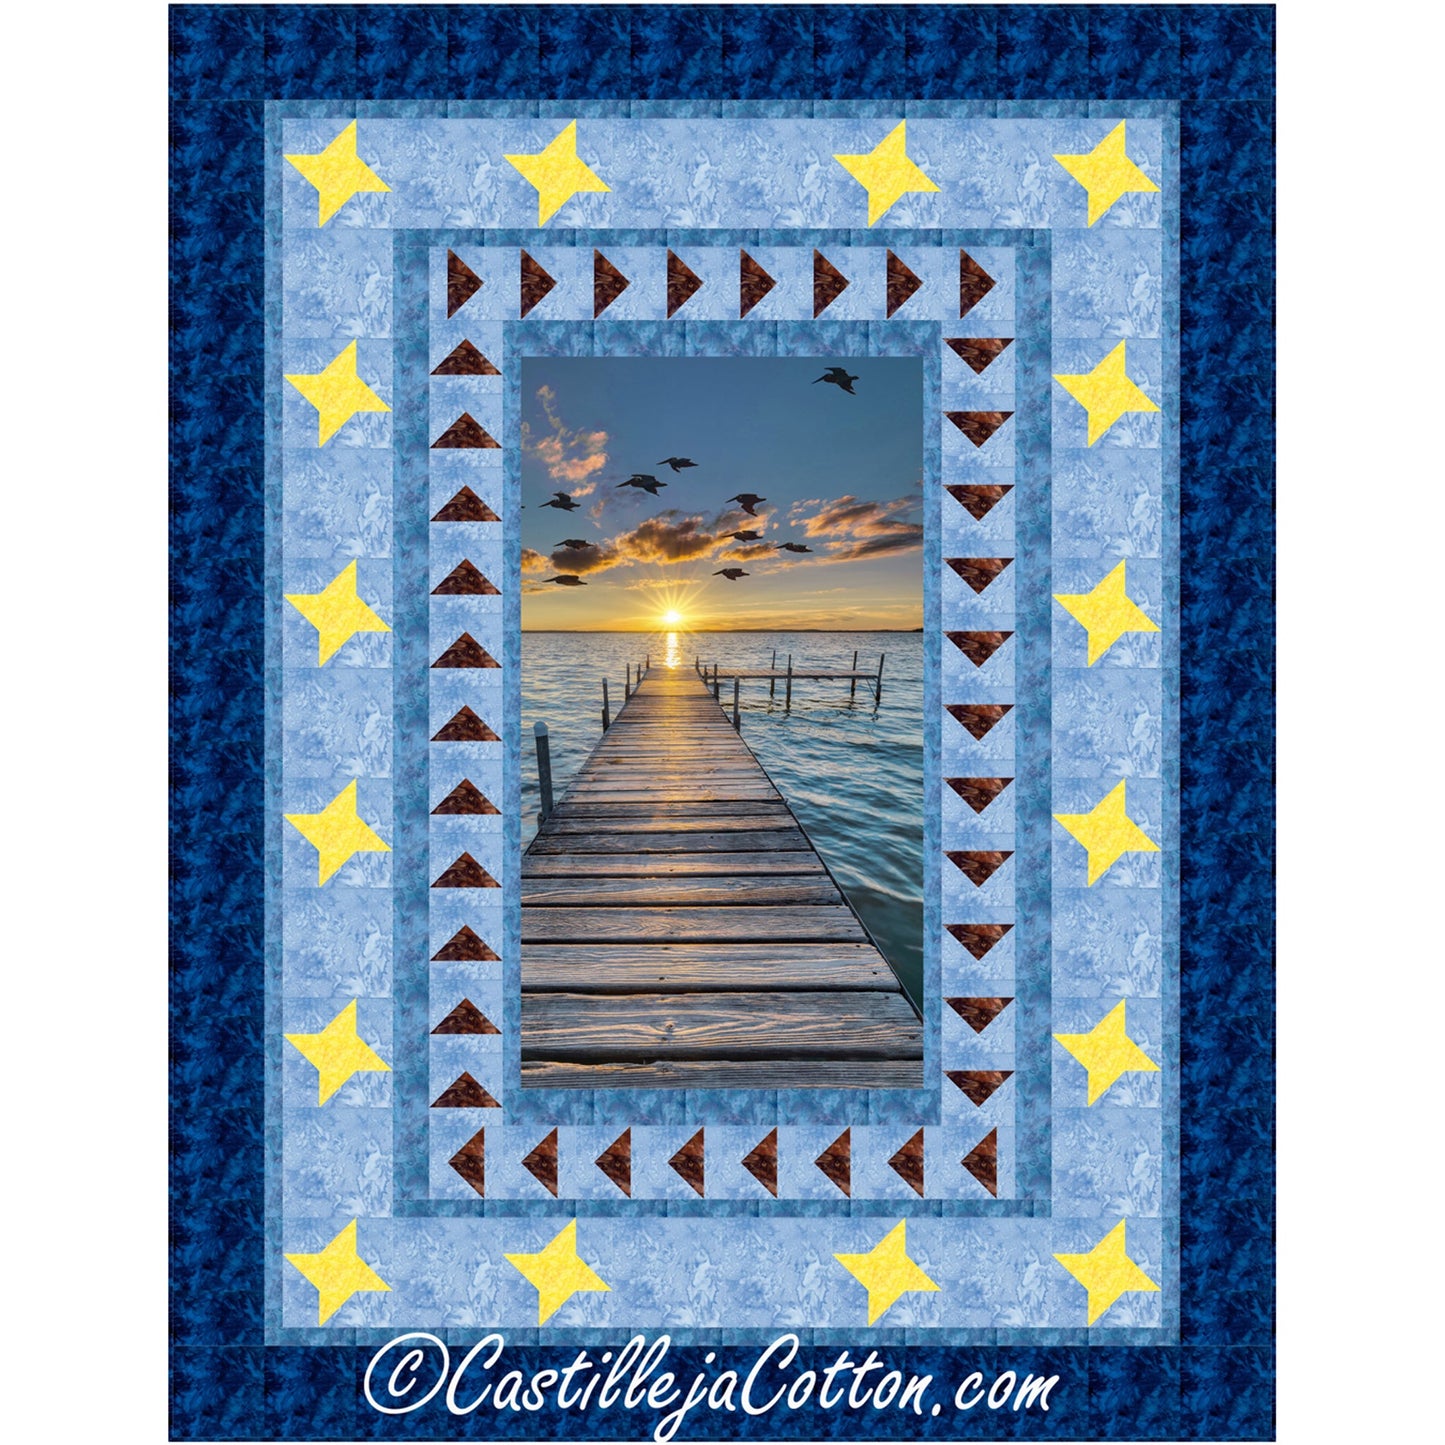 Beautiful quilt showcases a pier at sunset or sunrise. It is framed two borders: one is flying geese quilt design of triangles and the other is stars. Shown in shades of blue make it extra tranquil looking.